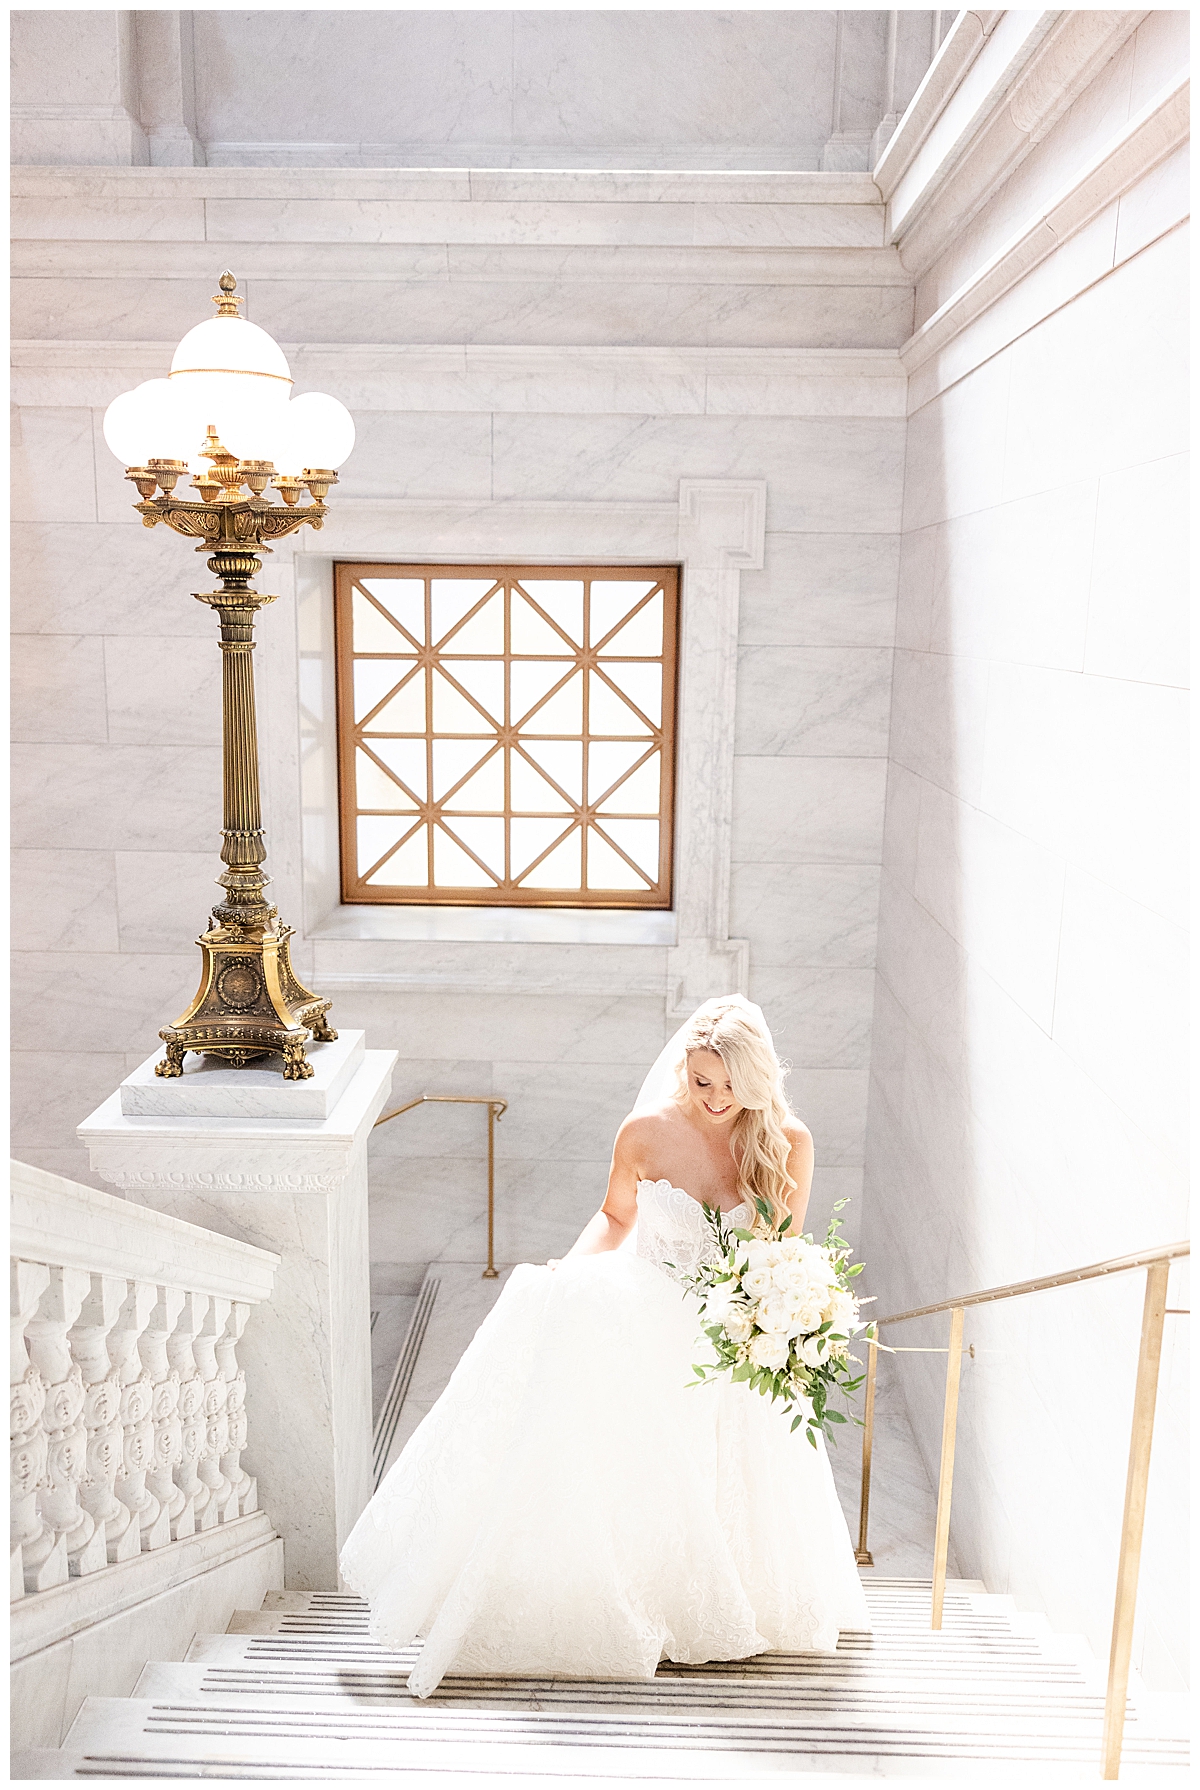 Bridal portrait on wedding day at Ohio State House